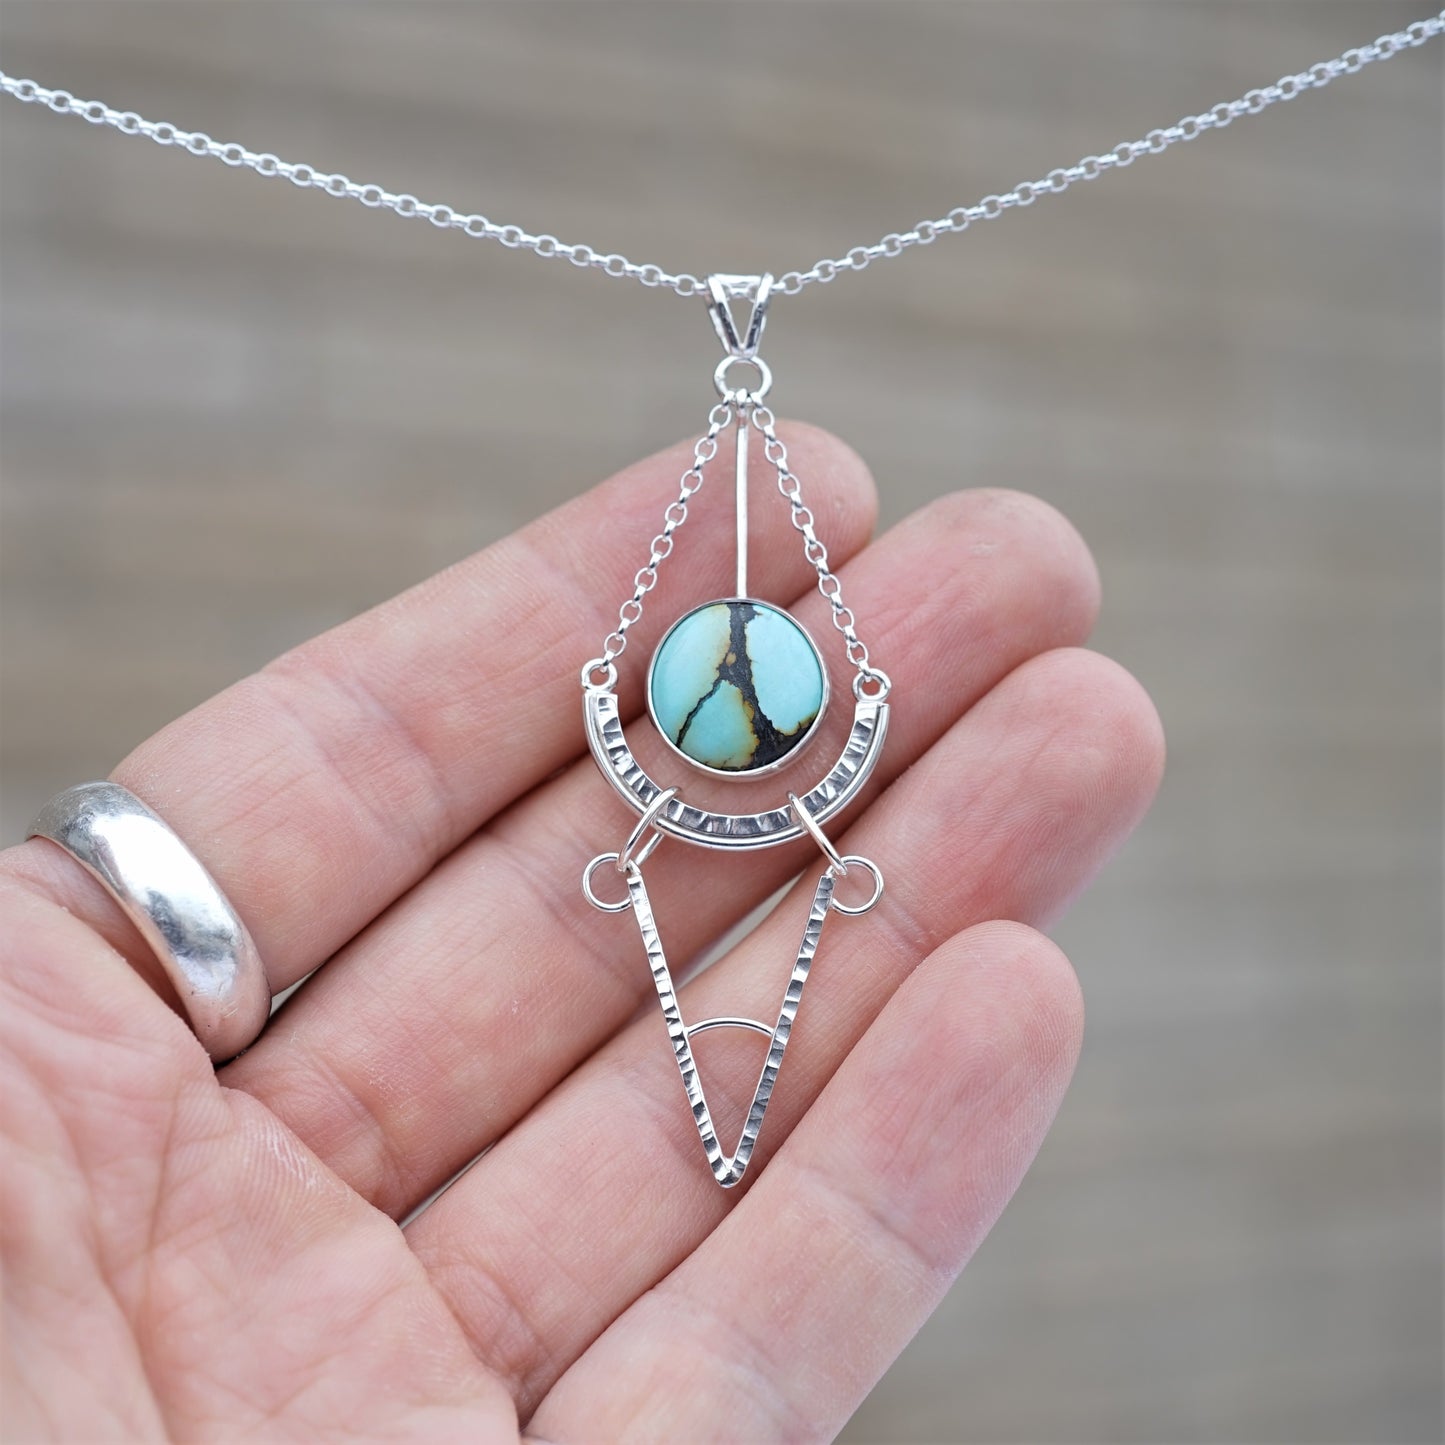 Tibetan Turquoise and 925 Sterling Silver Pendant (A)